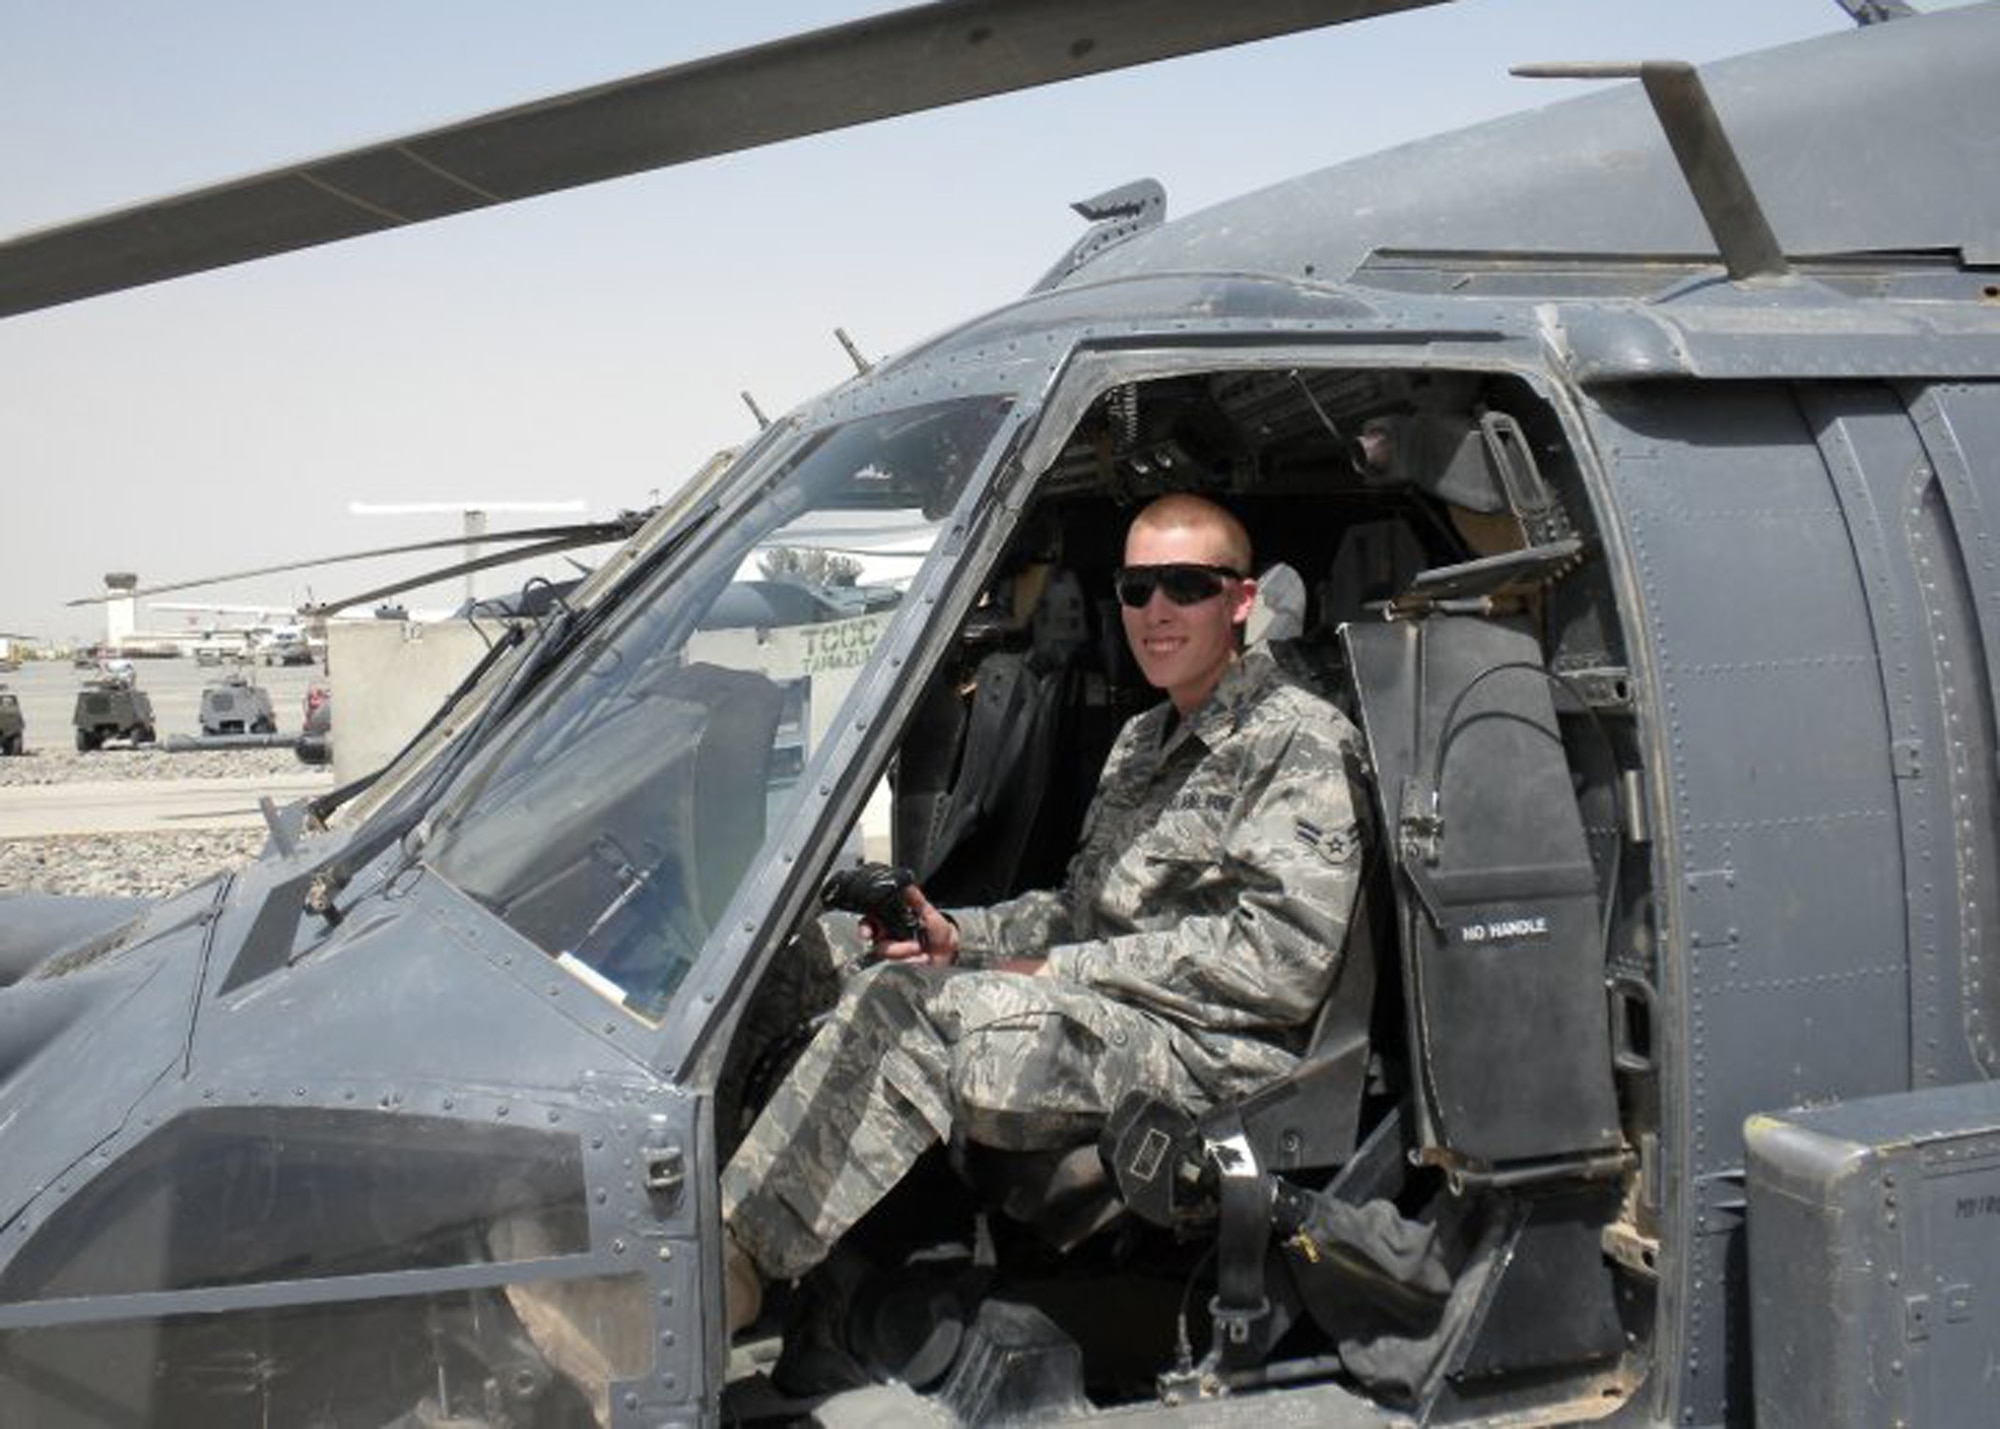 KANDAHAR AIRFIELD, Afghanistan. – Then Airman 1st Class Holden Montgomery, poses for a photo in the cockpit of a UH-60 Black Hawk aircraft during his deployment to Kandahar Airfield in 2010. As a result of his experiences while deployed, ‘Monty’ was diagnosed with post-traumatic stress disorder. Now receiving treatment for PTSD, Monty continues to serve his country doing the job he loves. (Courtesy photo)